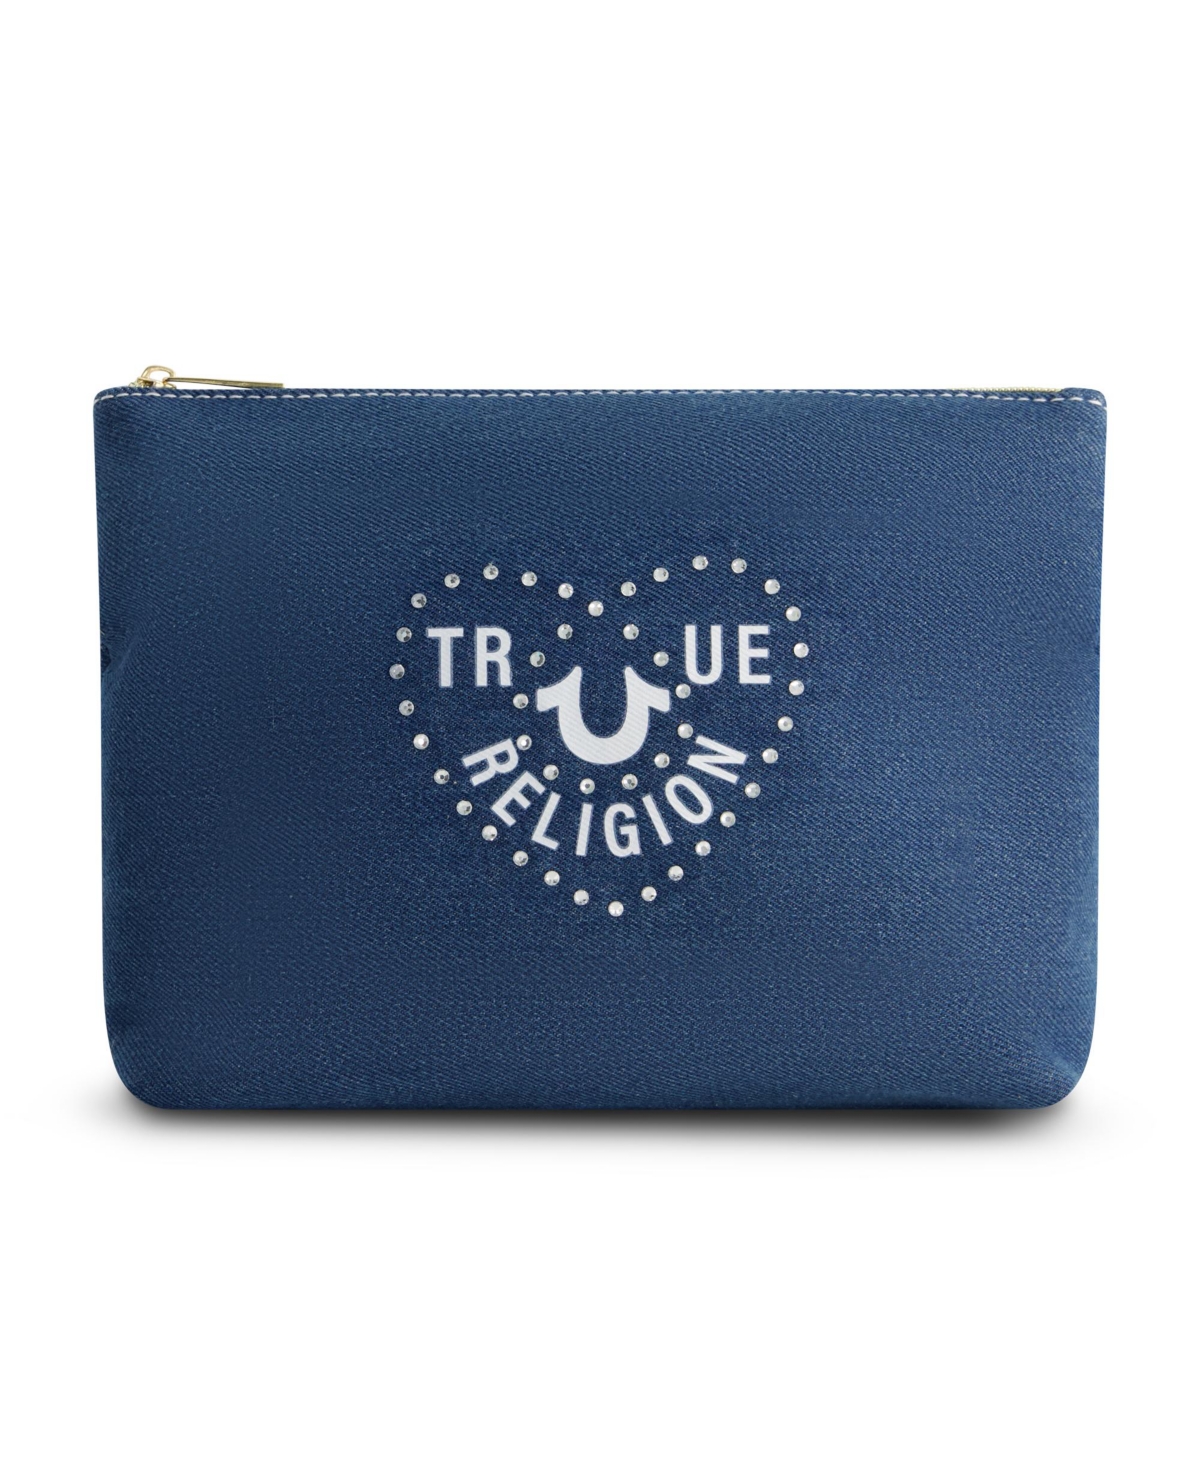 cosmetic bag with side pocket - Blue